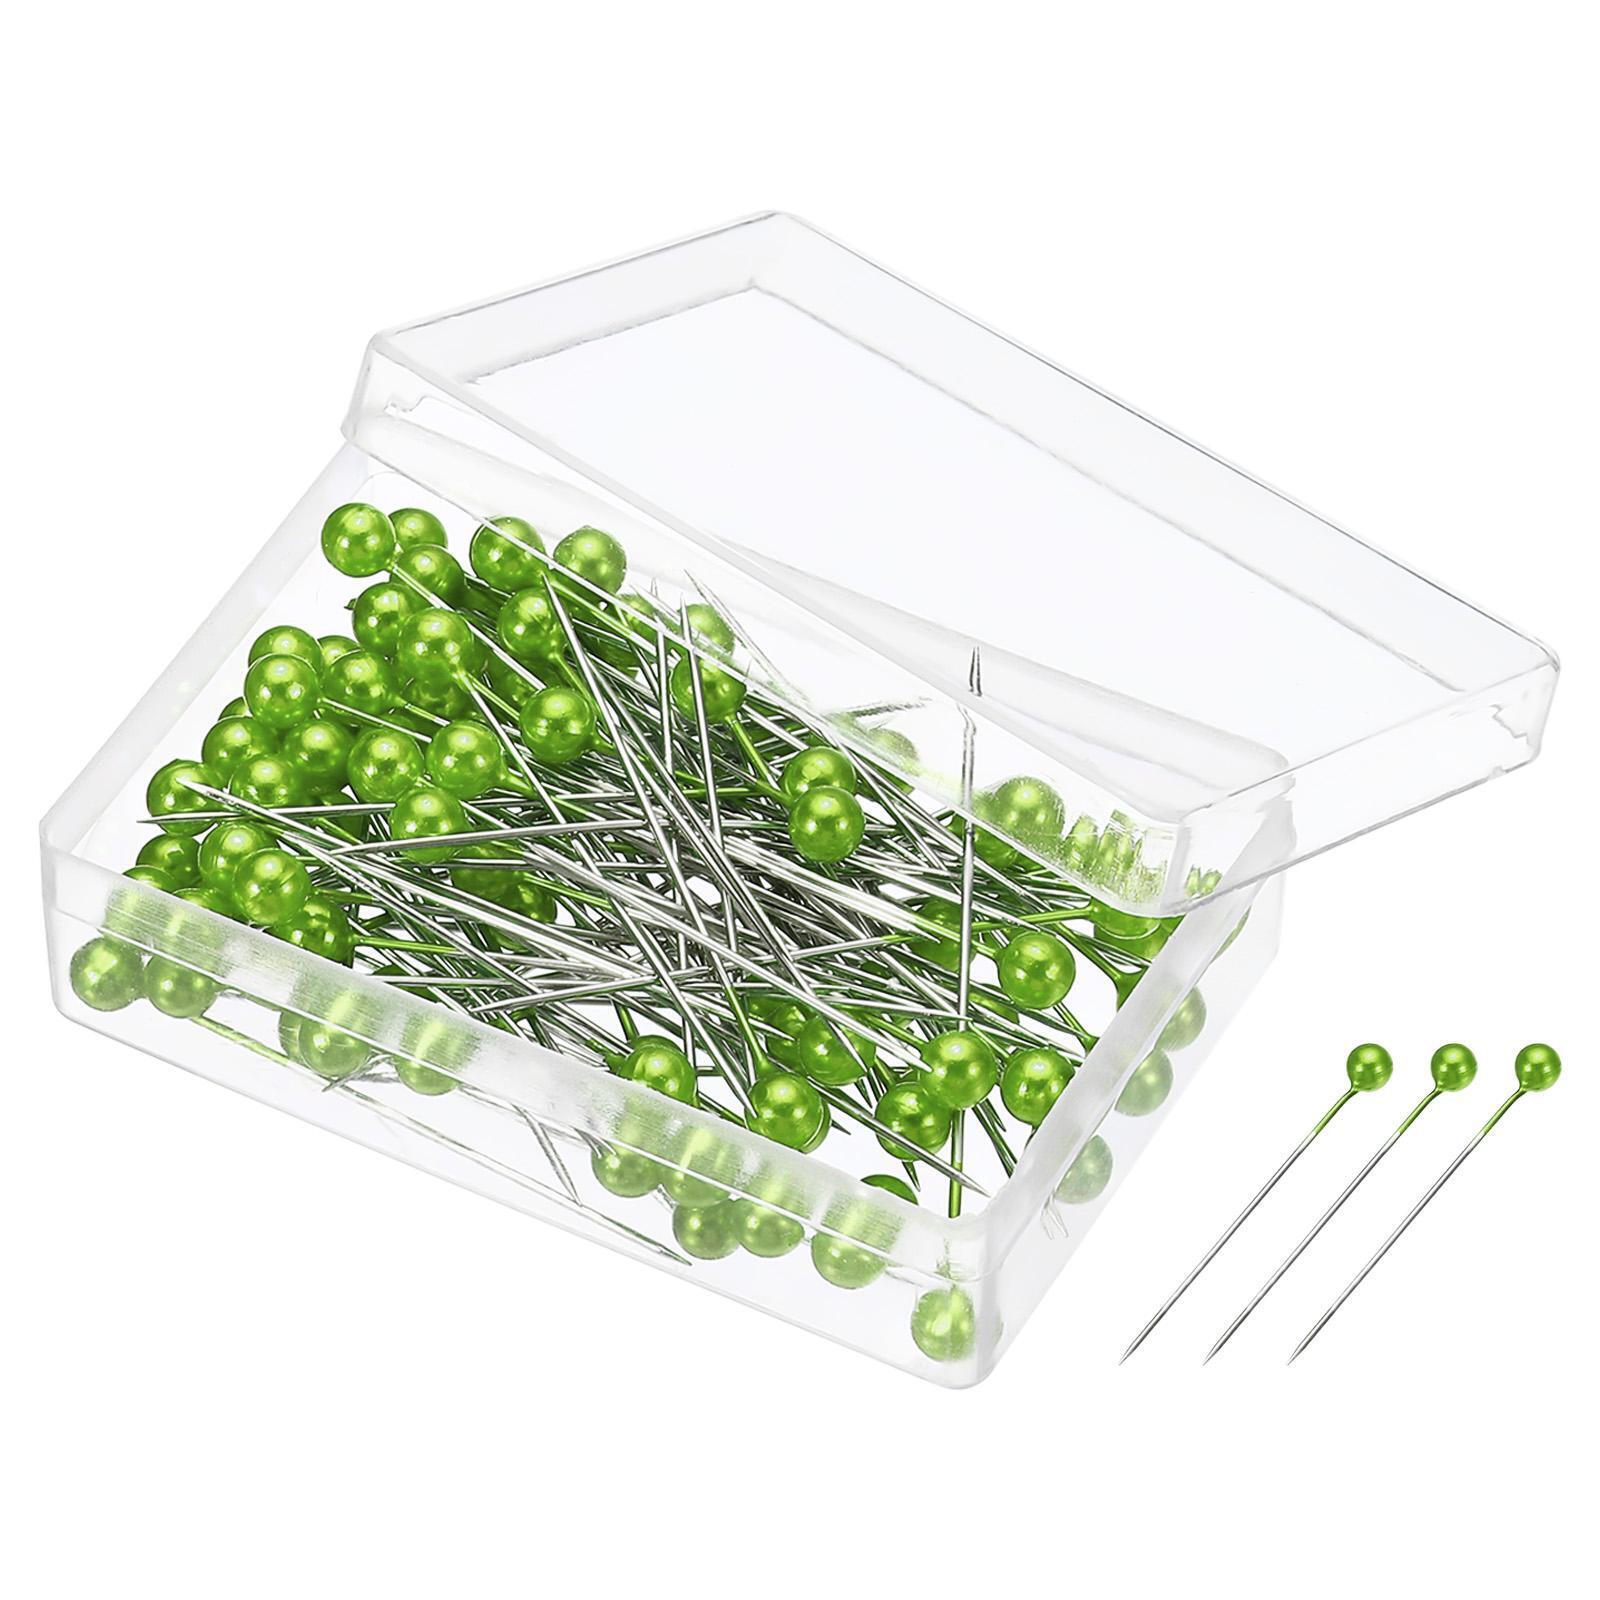 2 Set Pearlized Sewing Pins, Ball Head Needle Straight Quilting Pin, Green